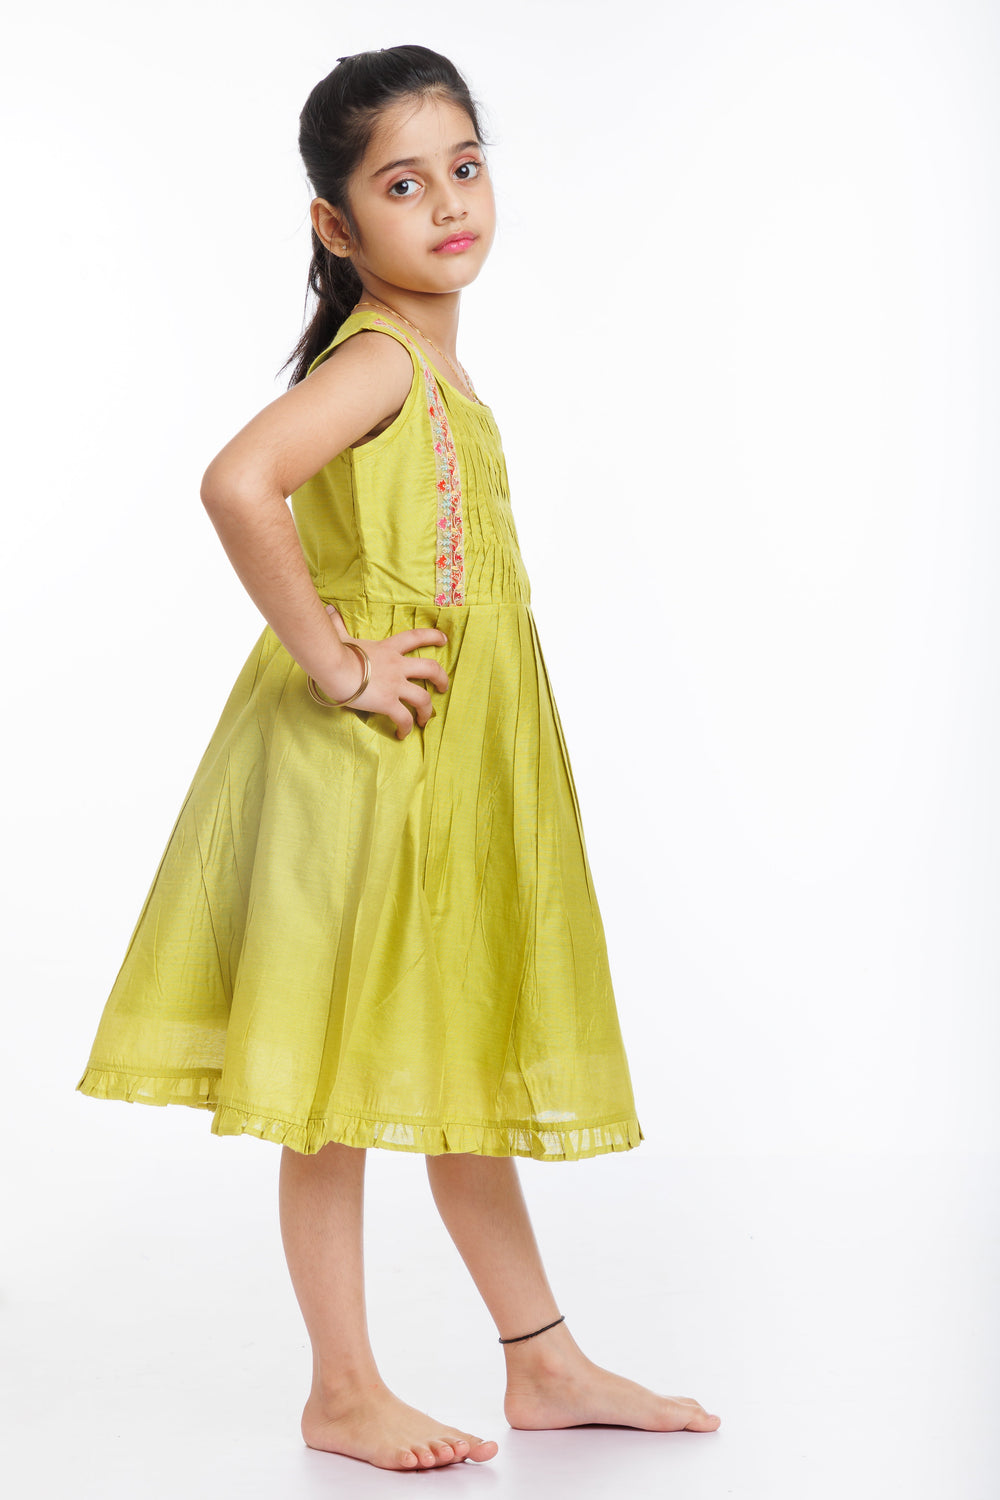 The Nesavu Girls Cotton Frock Girls Vibrant Green Cotton Frock with Floral Embroidery - Casual Elegance Redefined Nesavu Green Embroidered Cotton Dress for Girls | Perfect for Summer Fun | The Nesavu